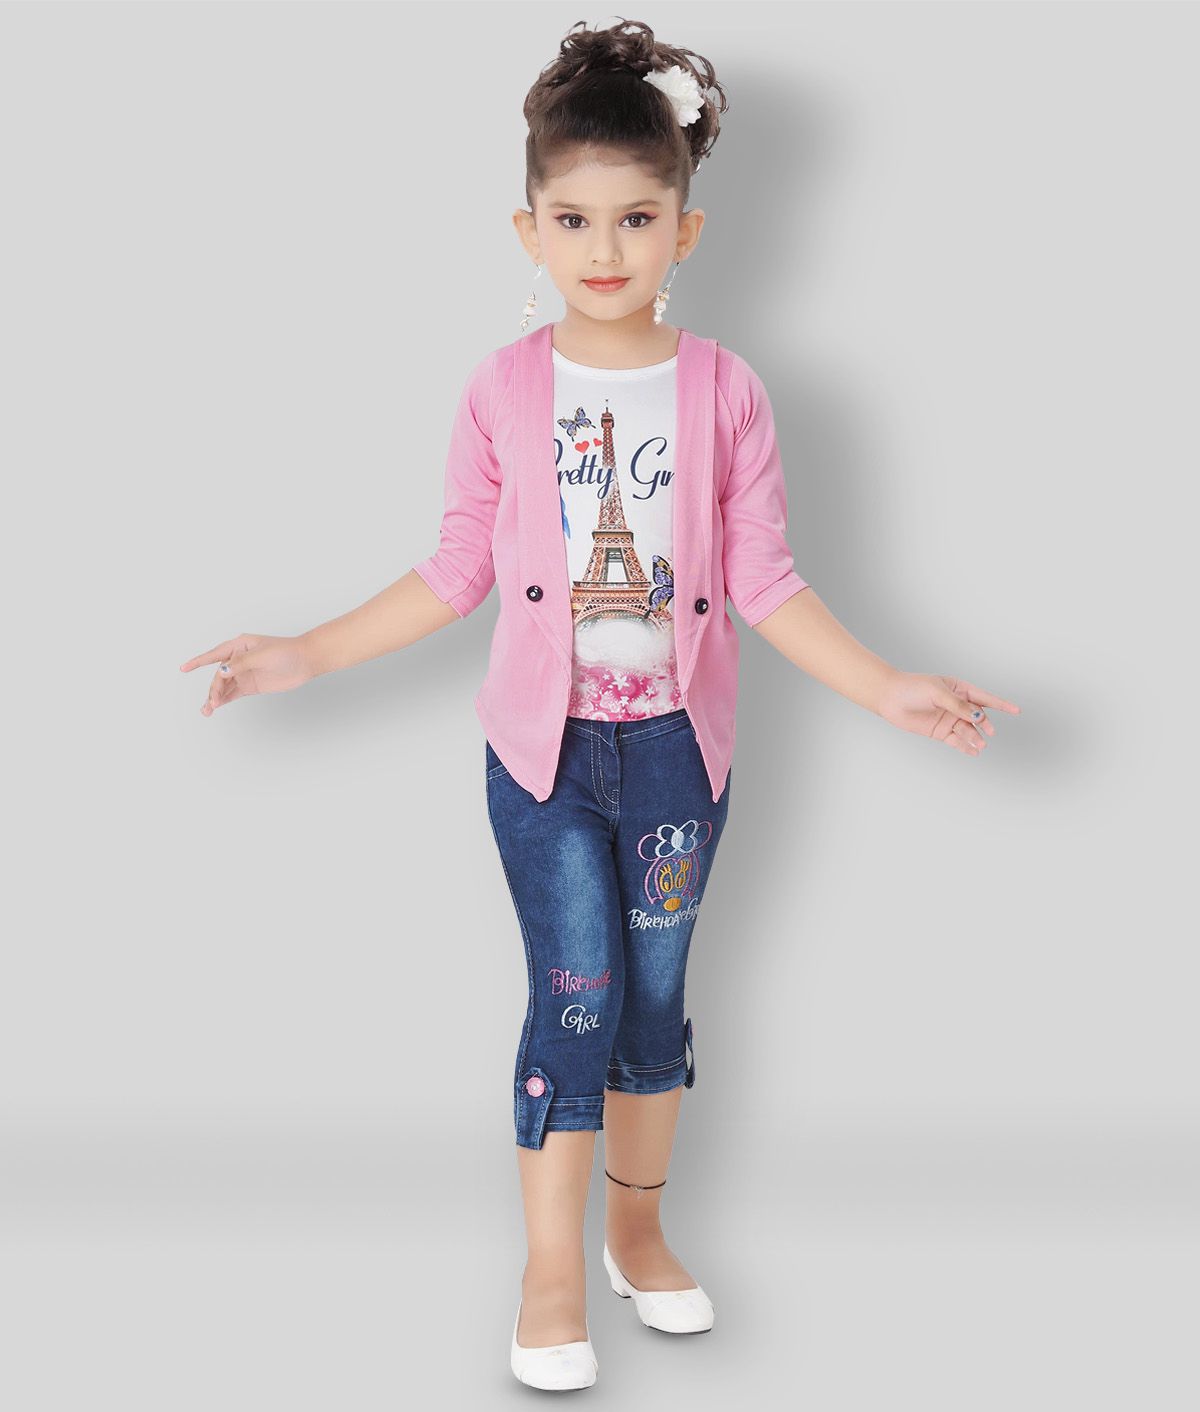     			Arshia Fashions - Pink Cotton Blend Girl's Top With Jacket With Capris ( Pack of 1 )